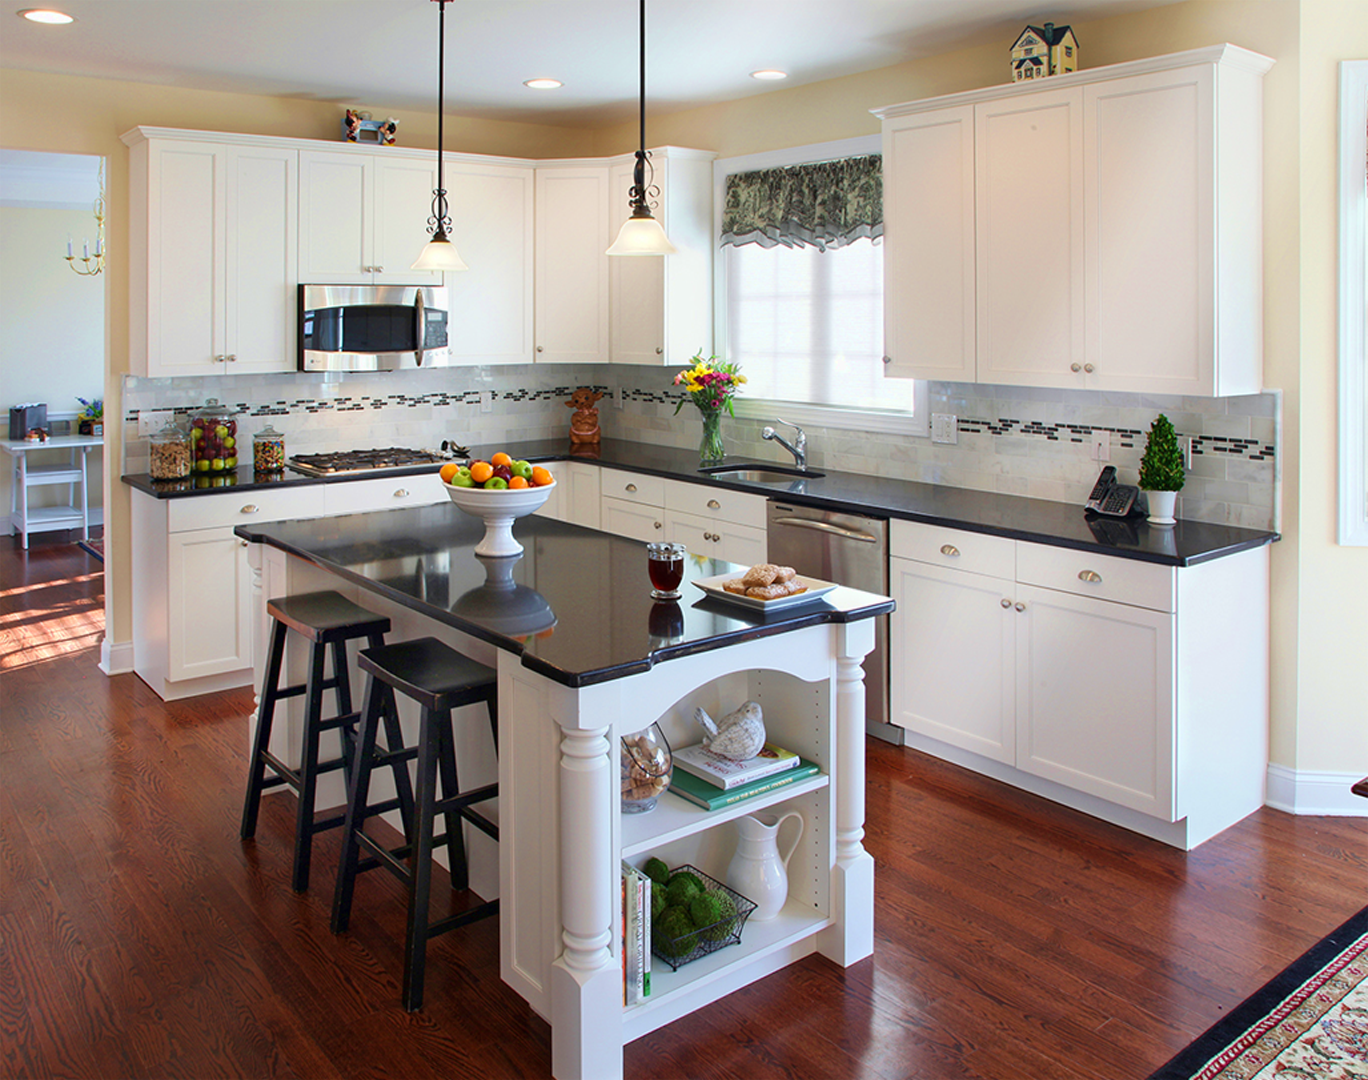 What color countertop is best for a kitchen?